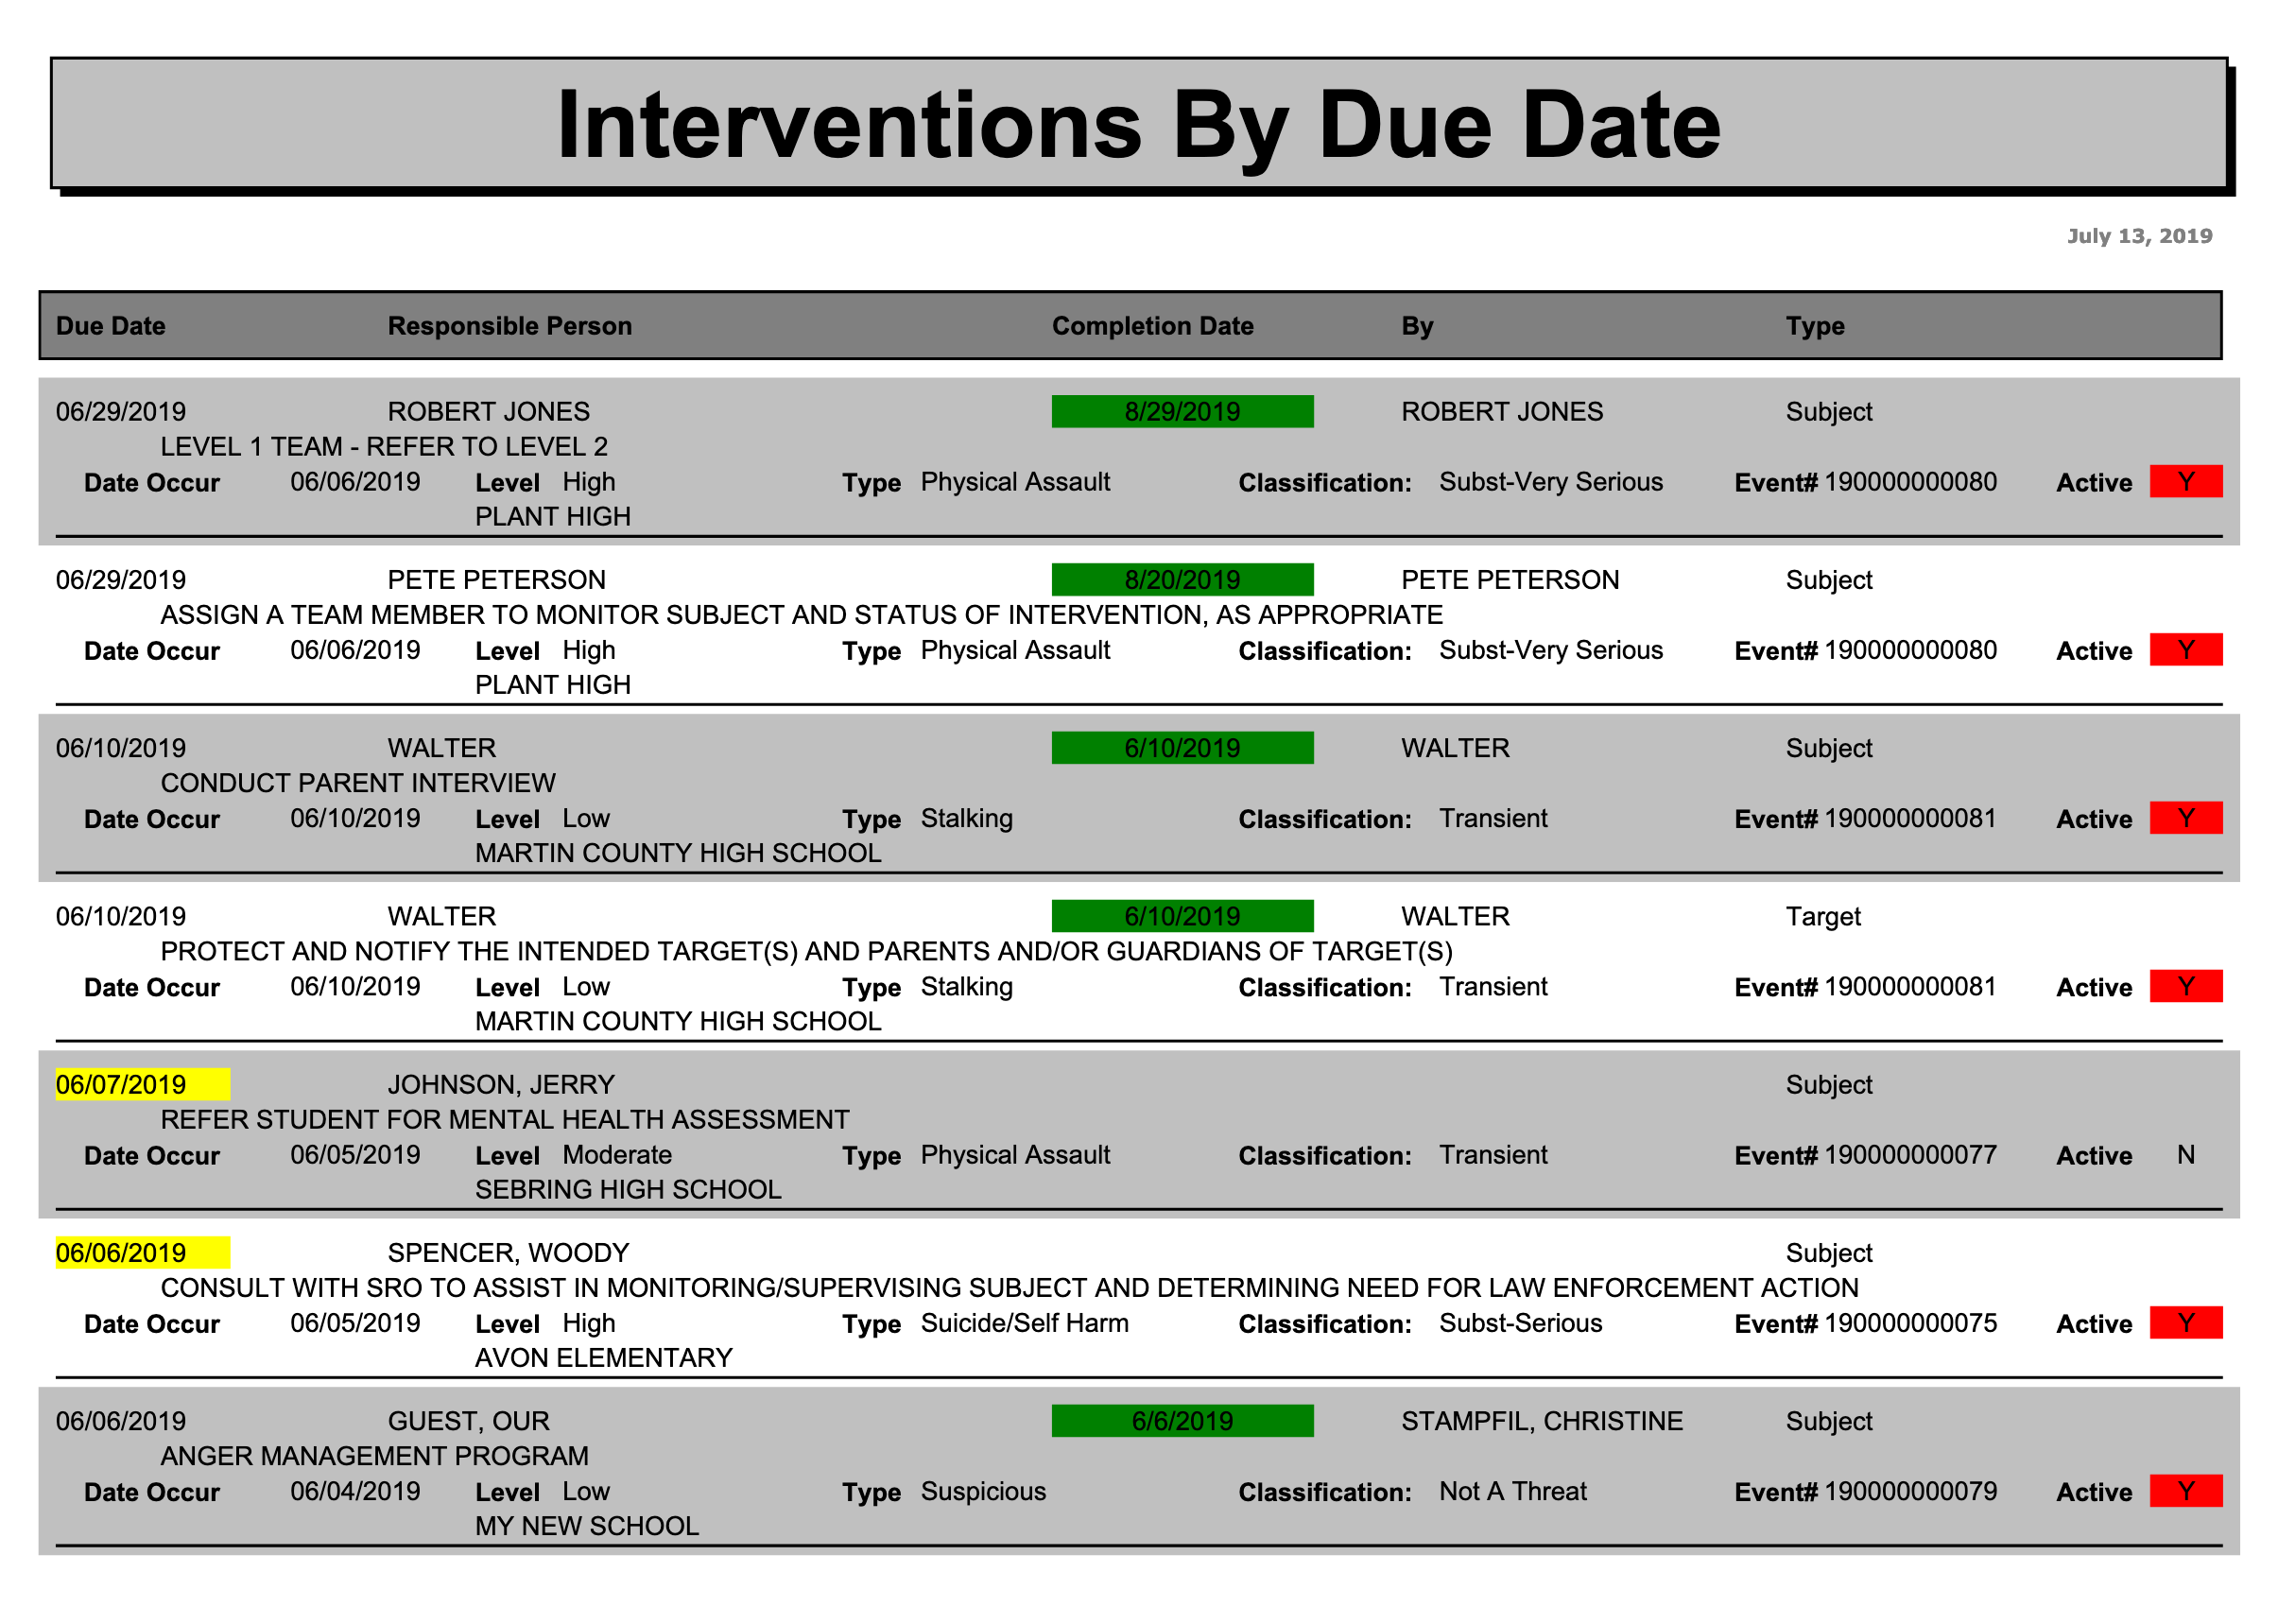 Report - Interventions by Due Date